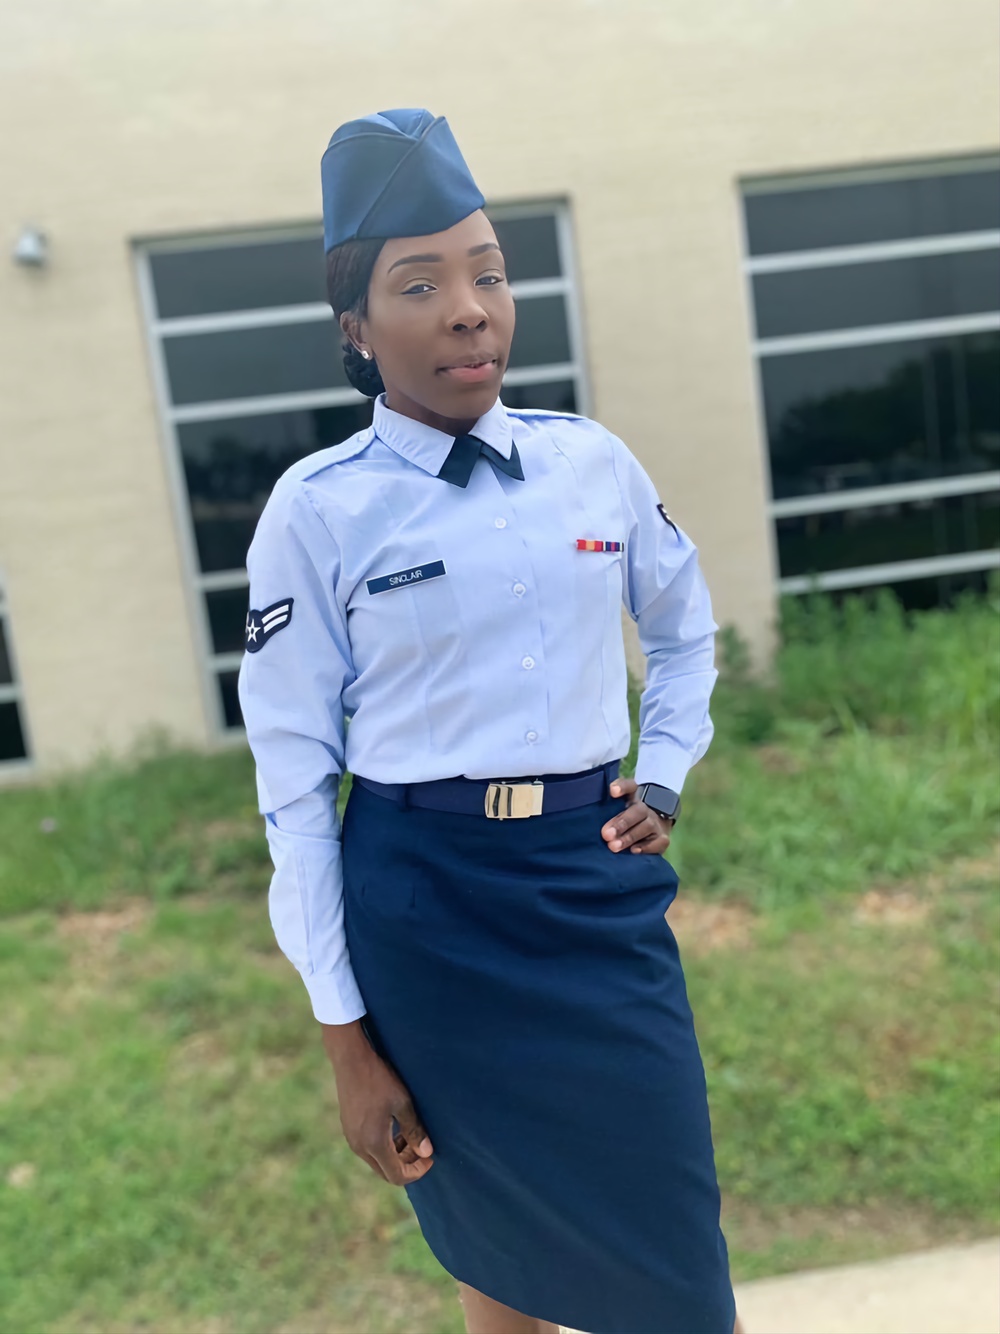 Stories of Service: Olympian to Airman